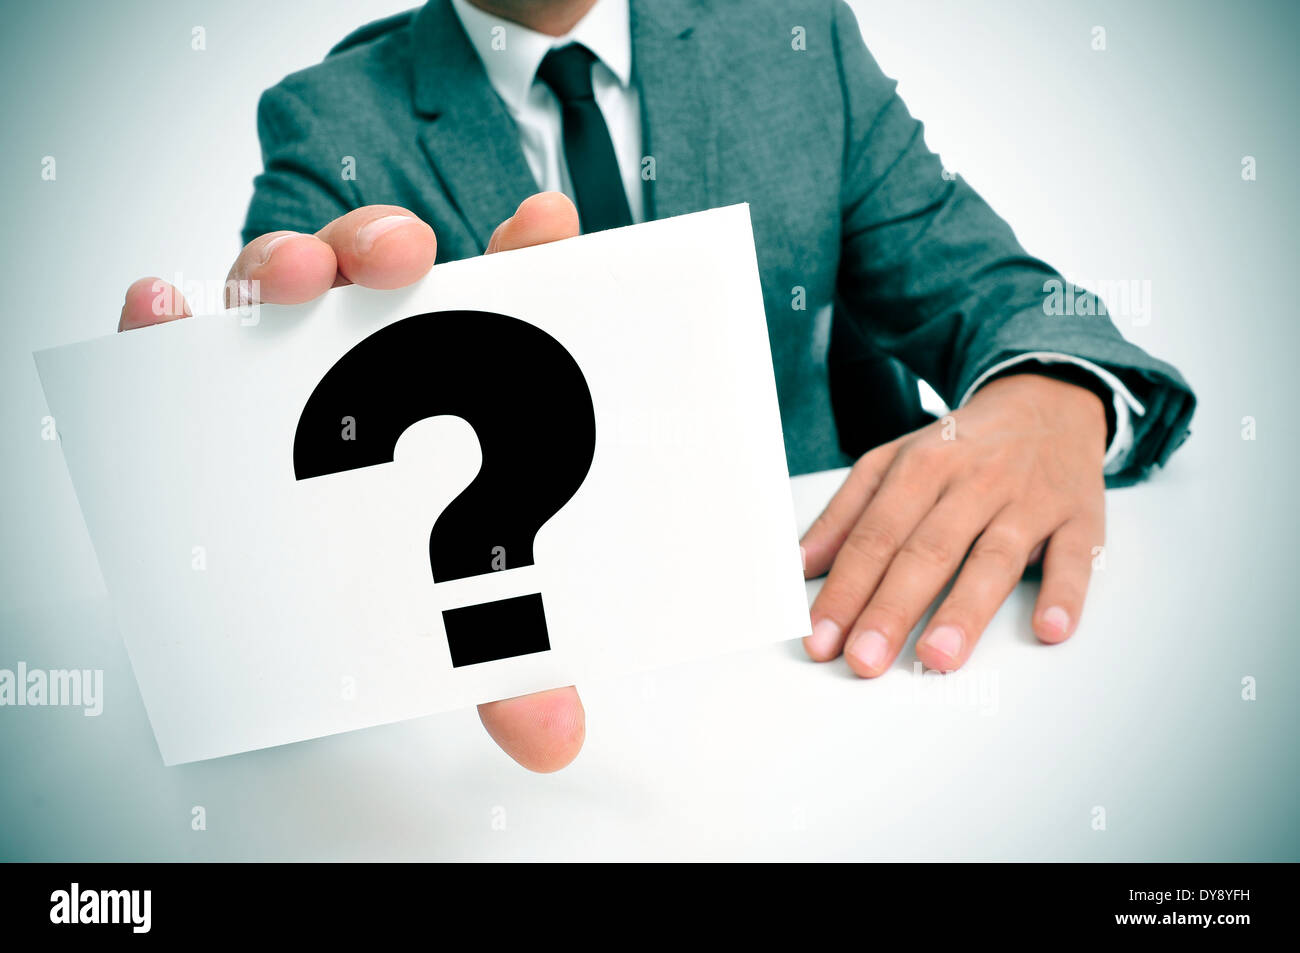 a man wearing a suit sitting in a desk holding a signboard with a question mark Stock Photo